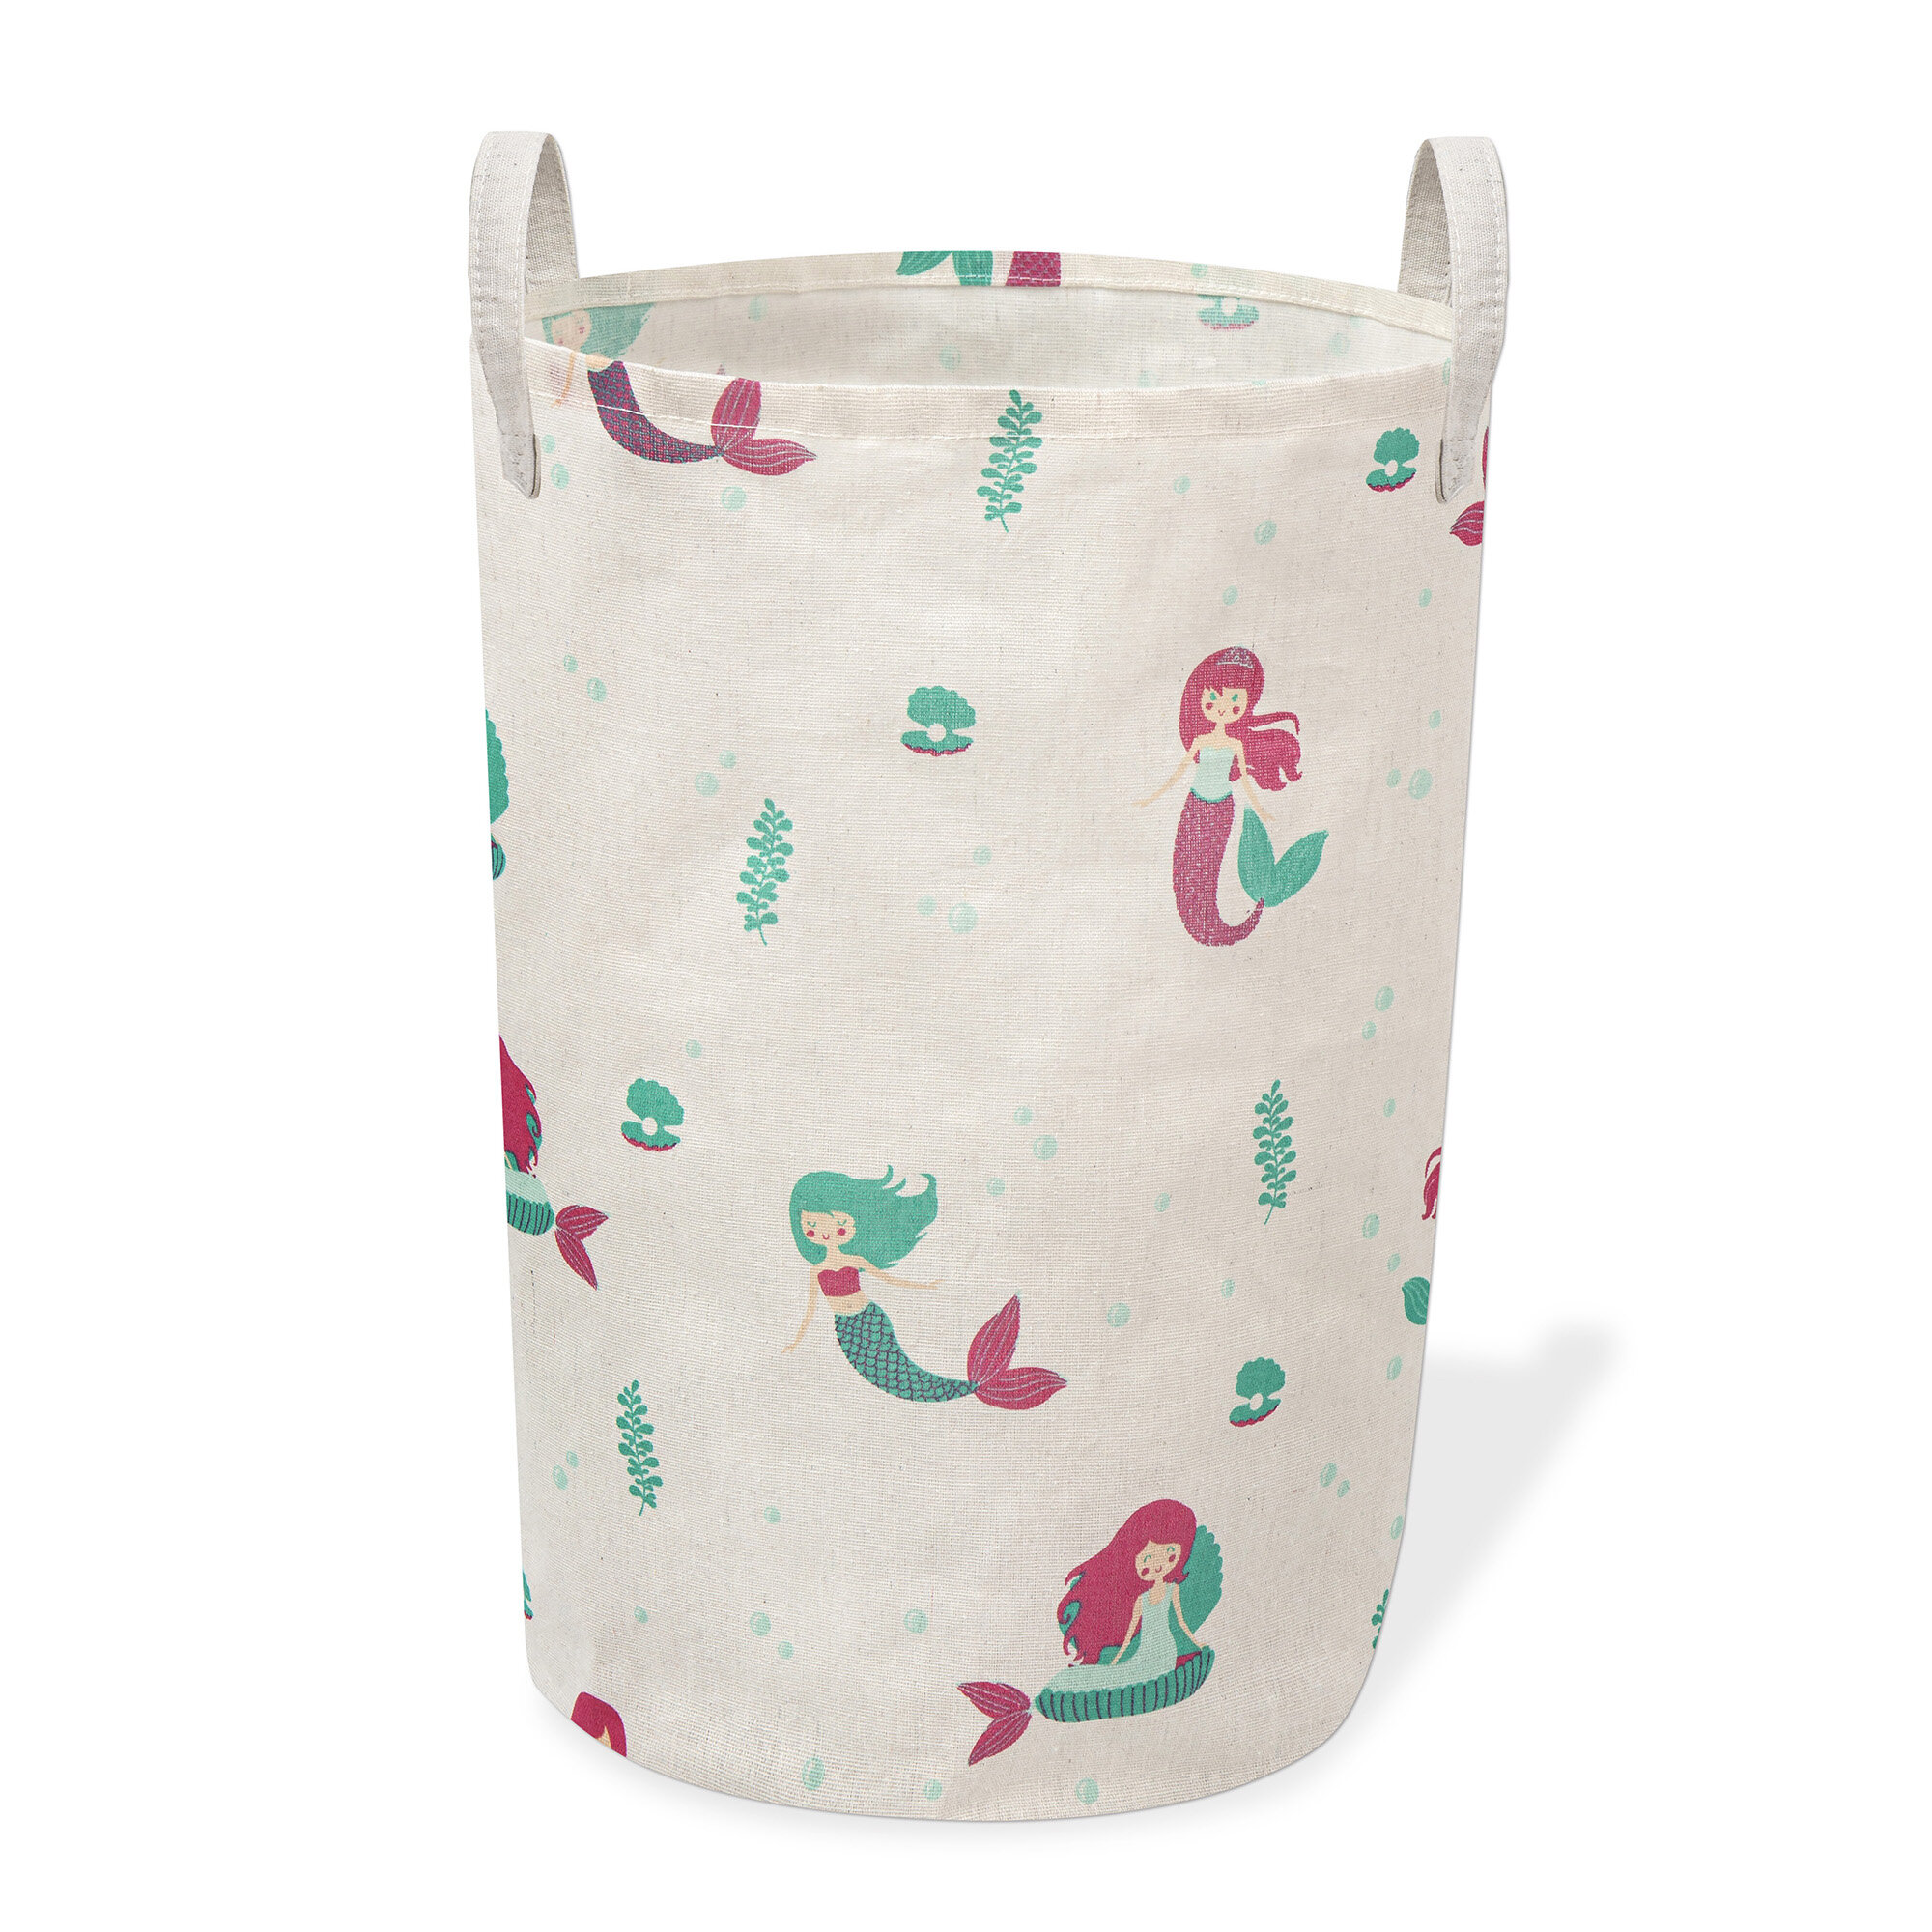 Mermaid Childrens Clothes Hamper Country Club Kids Pop Up Laundry Basket 